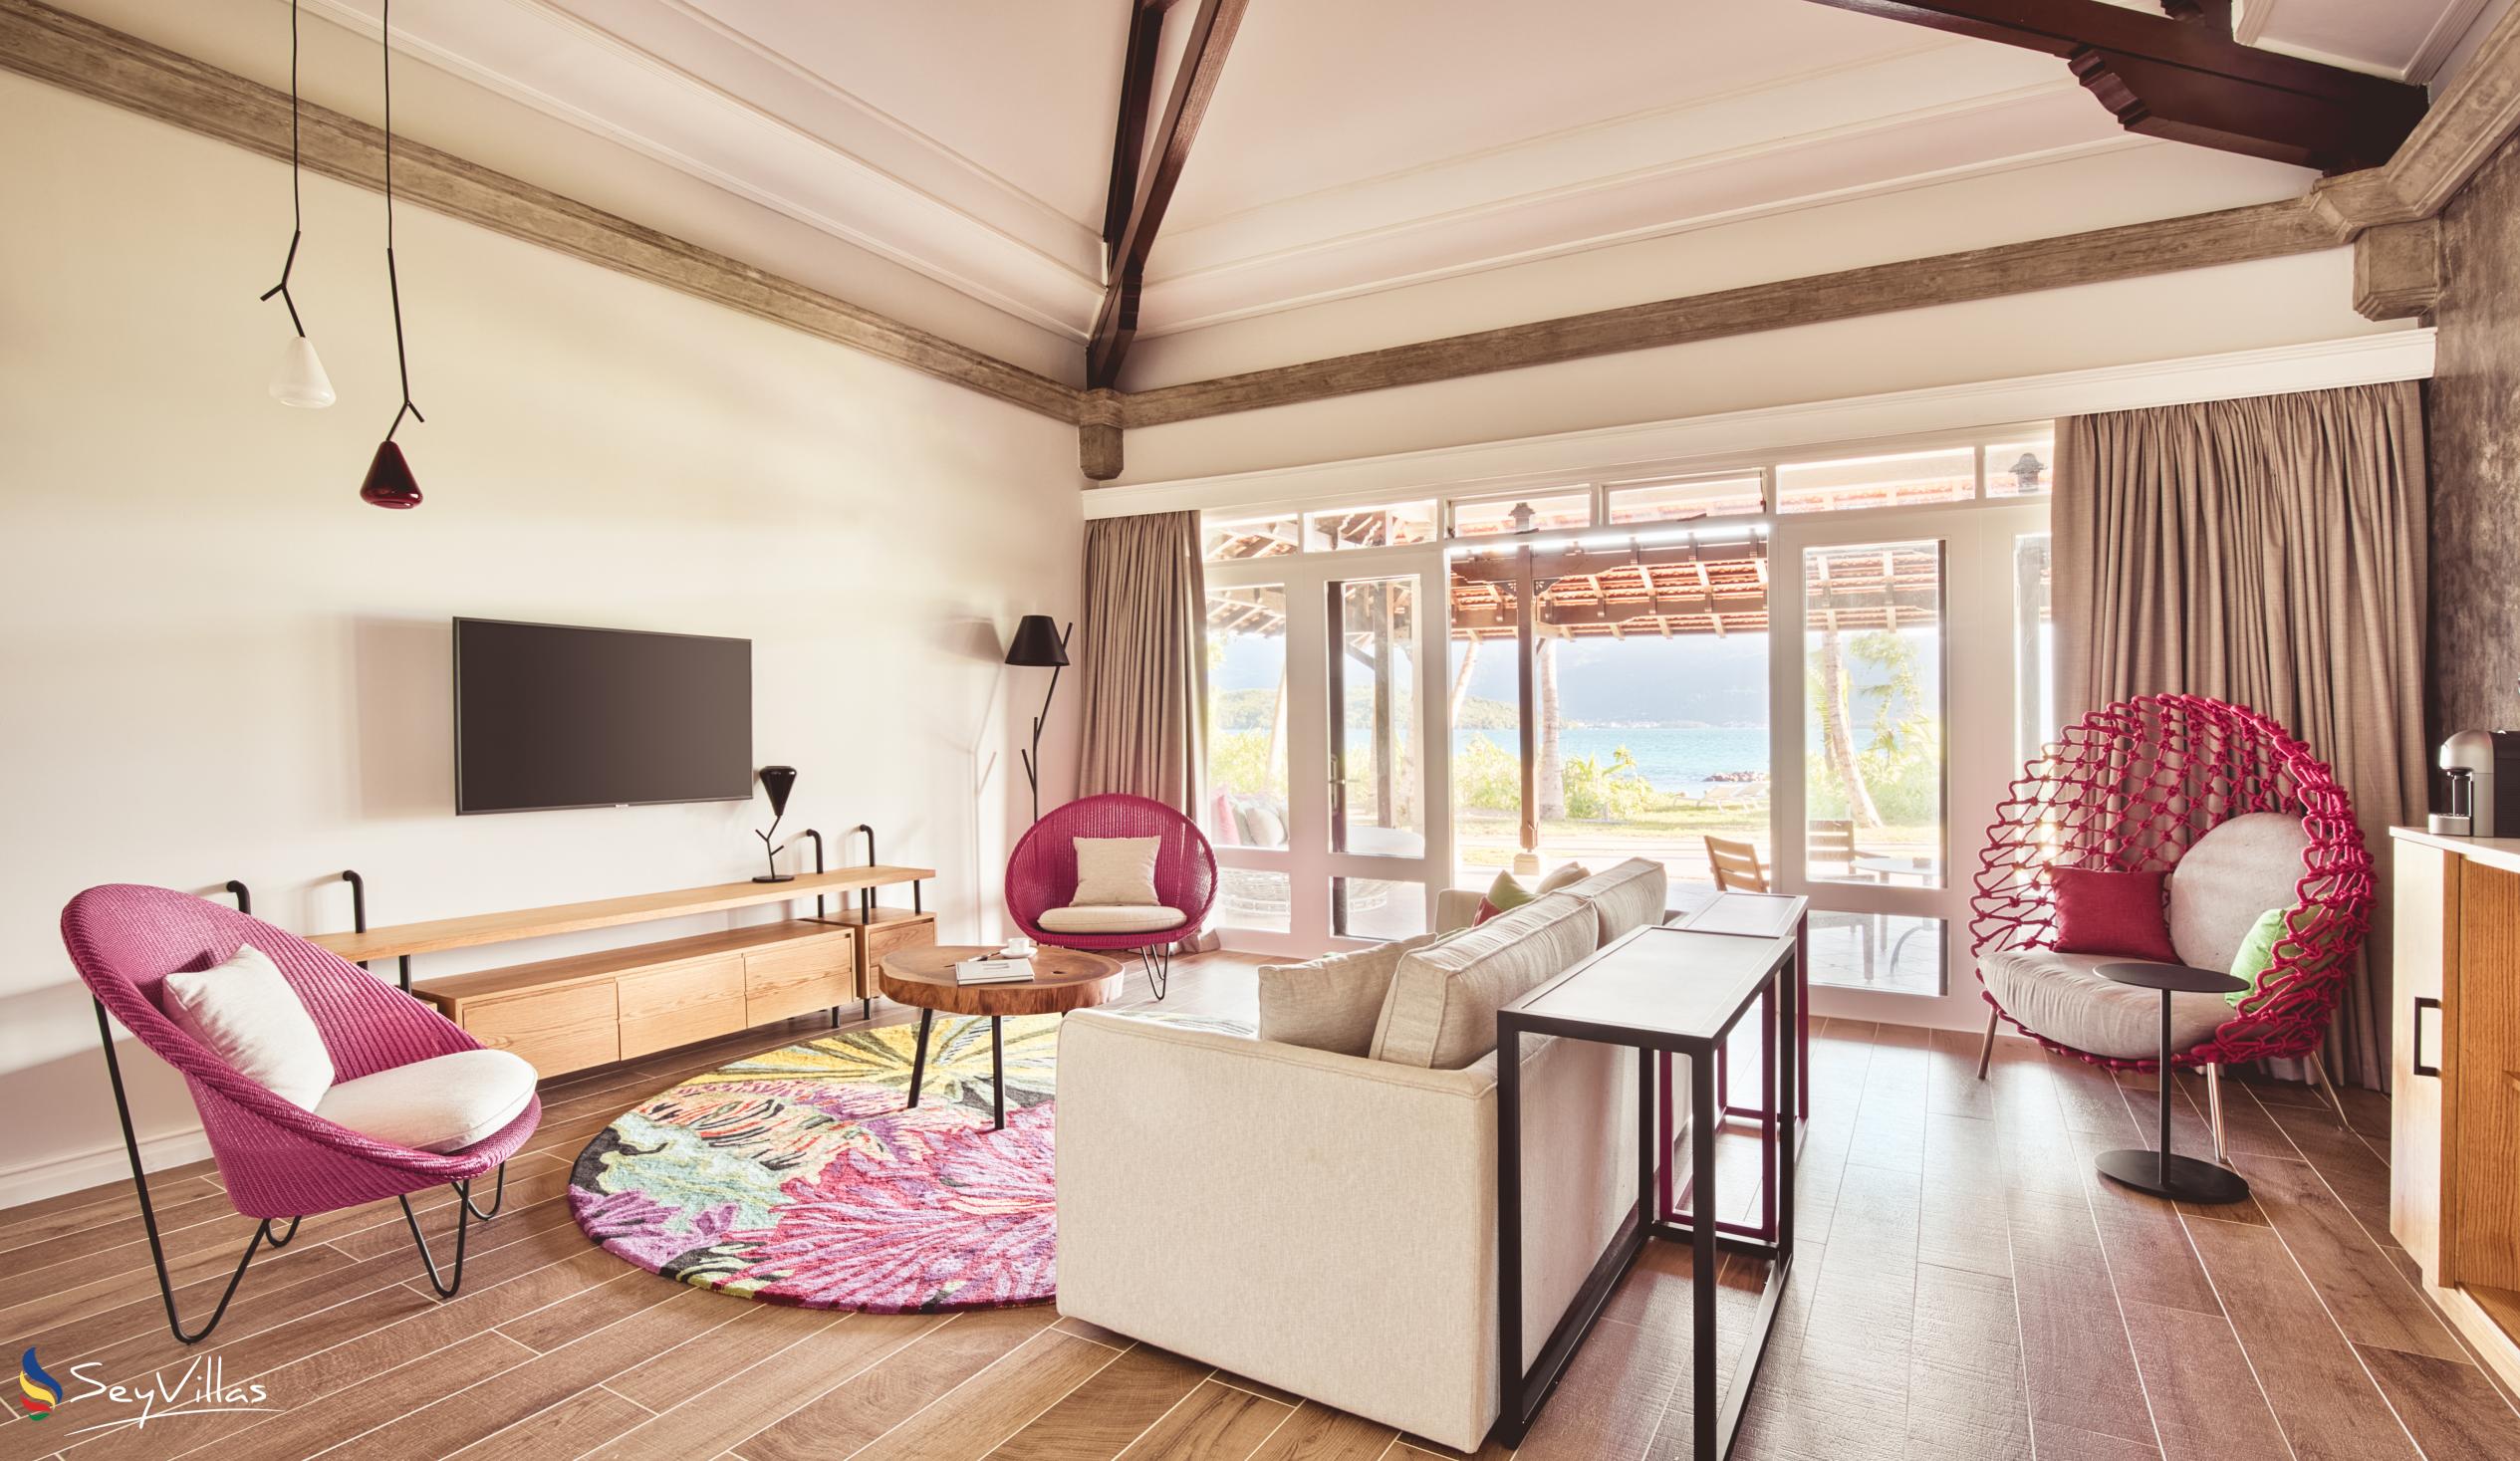 Photo 92: Club Med Seychelles - Family Suite with Private Pool - Saint Anne (Seychelles)